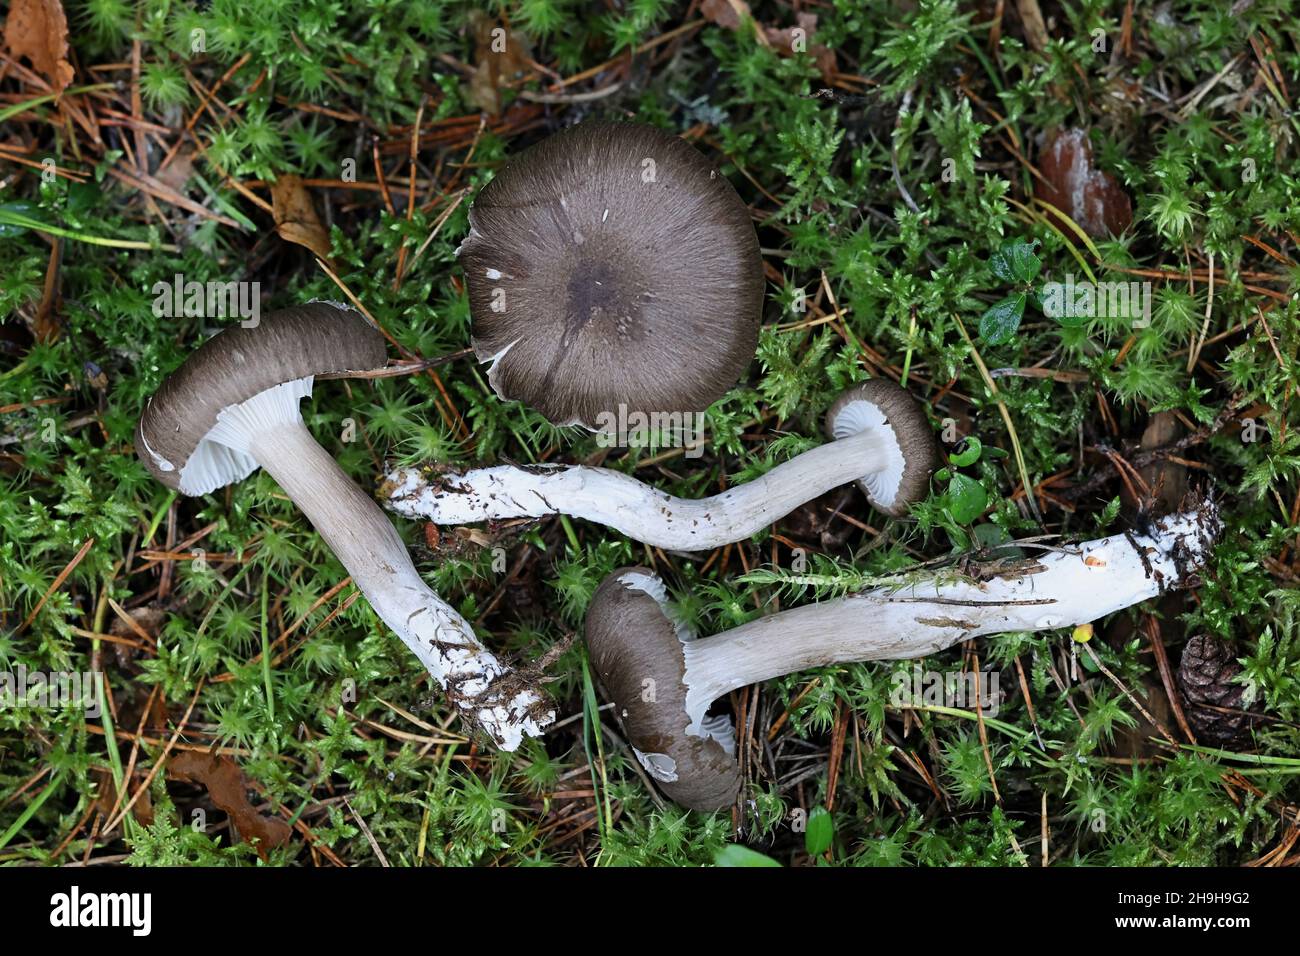 Hygrophorus camarophyllus, known as Arched Woodwax, wild mushroom from Finland Stock Photo